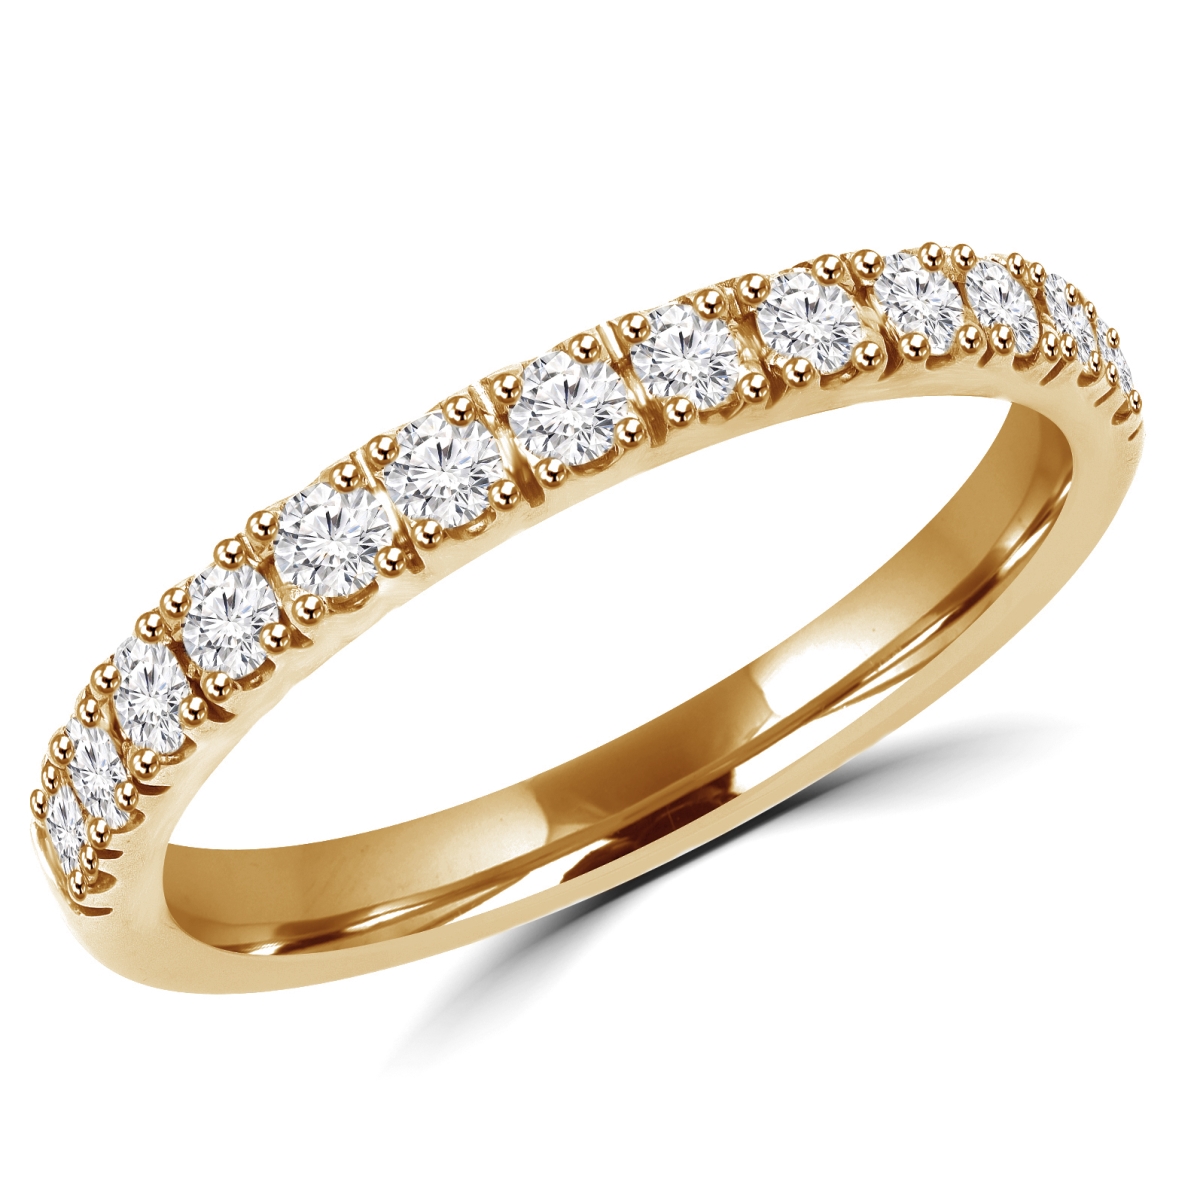 Picture of Majesty Diamonds MD180187-6.5 0.3 CTW Round Diamond Semi-Eternity Wedding Band Ring in 14K Yellow Gold - Size 6.5